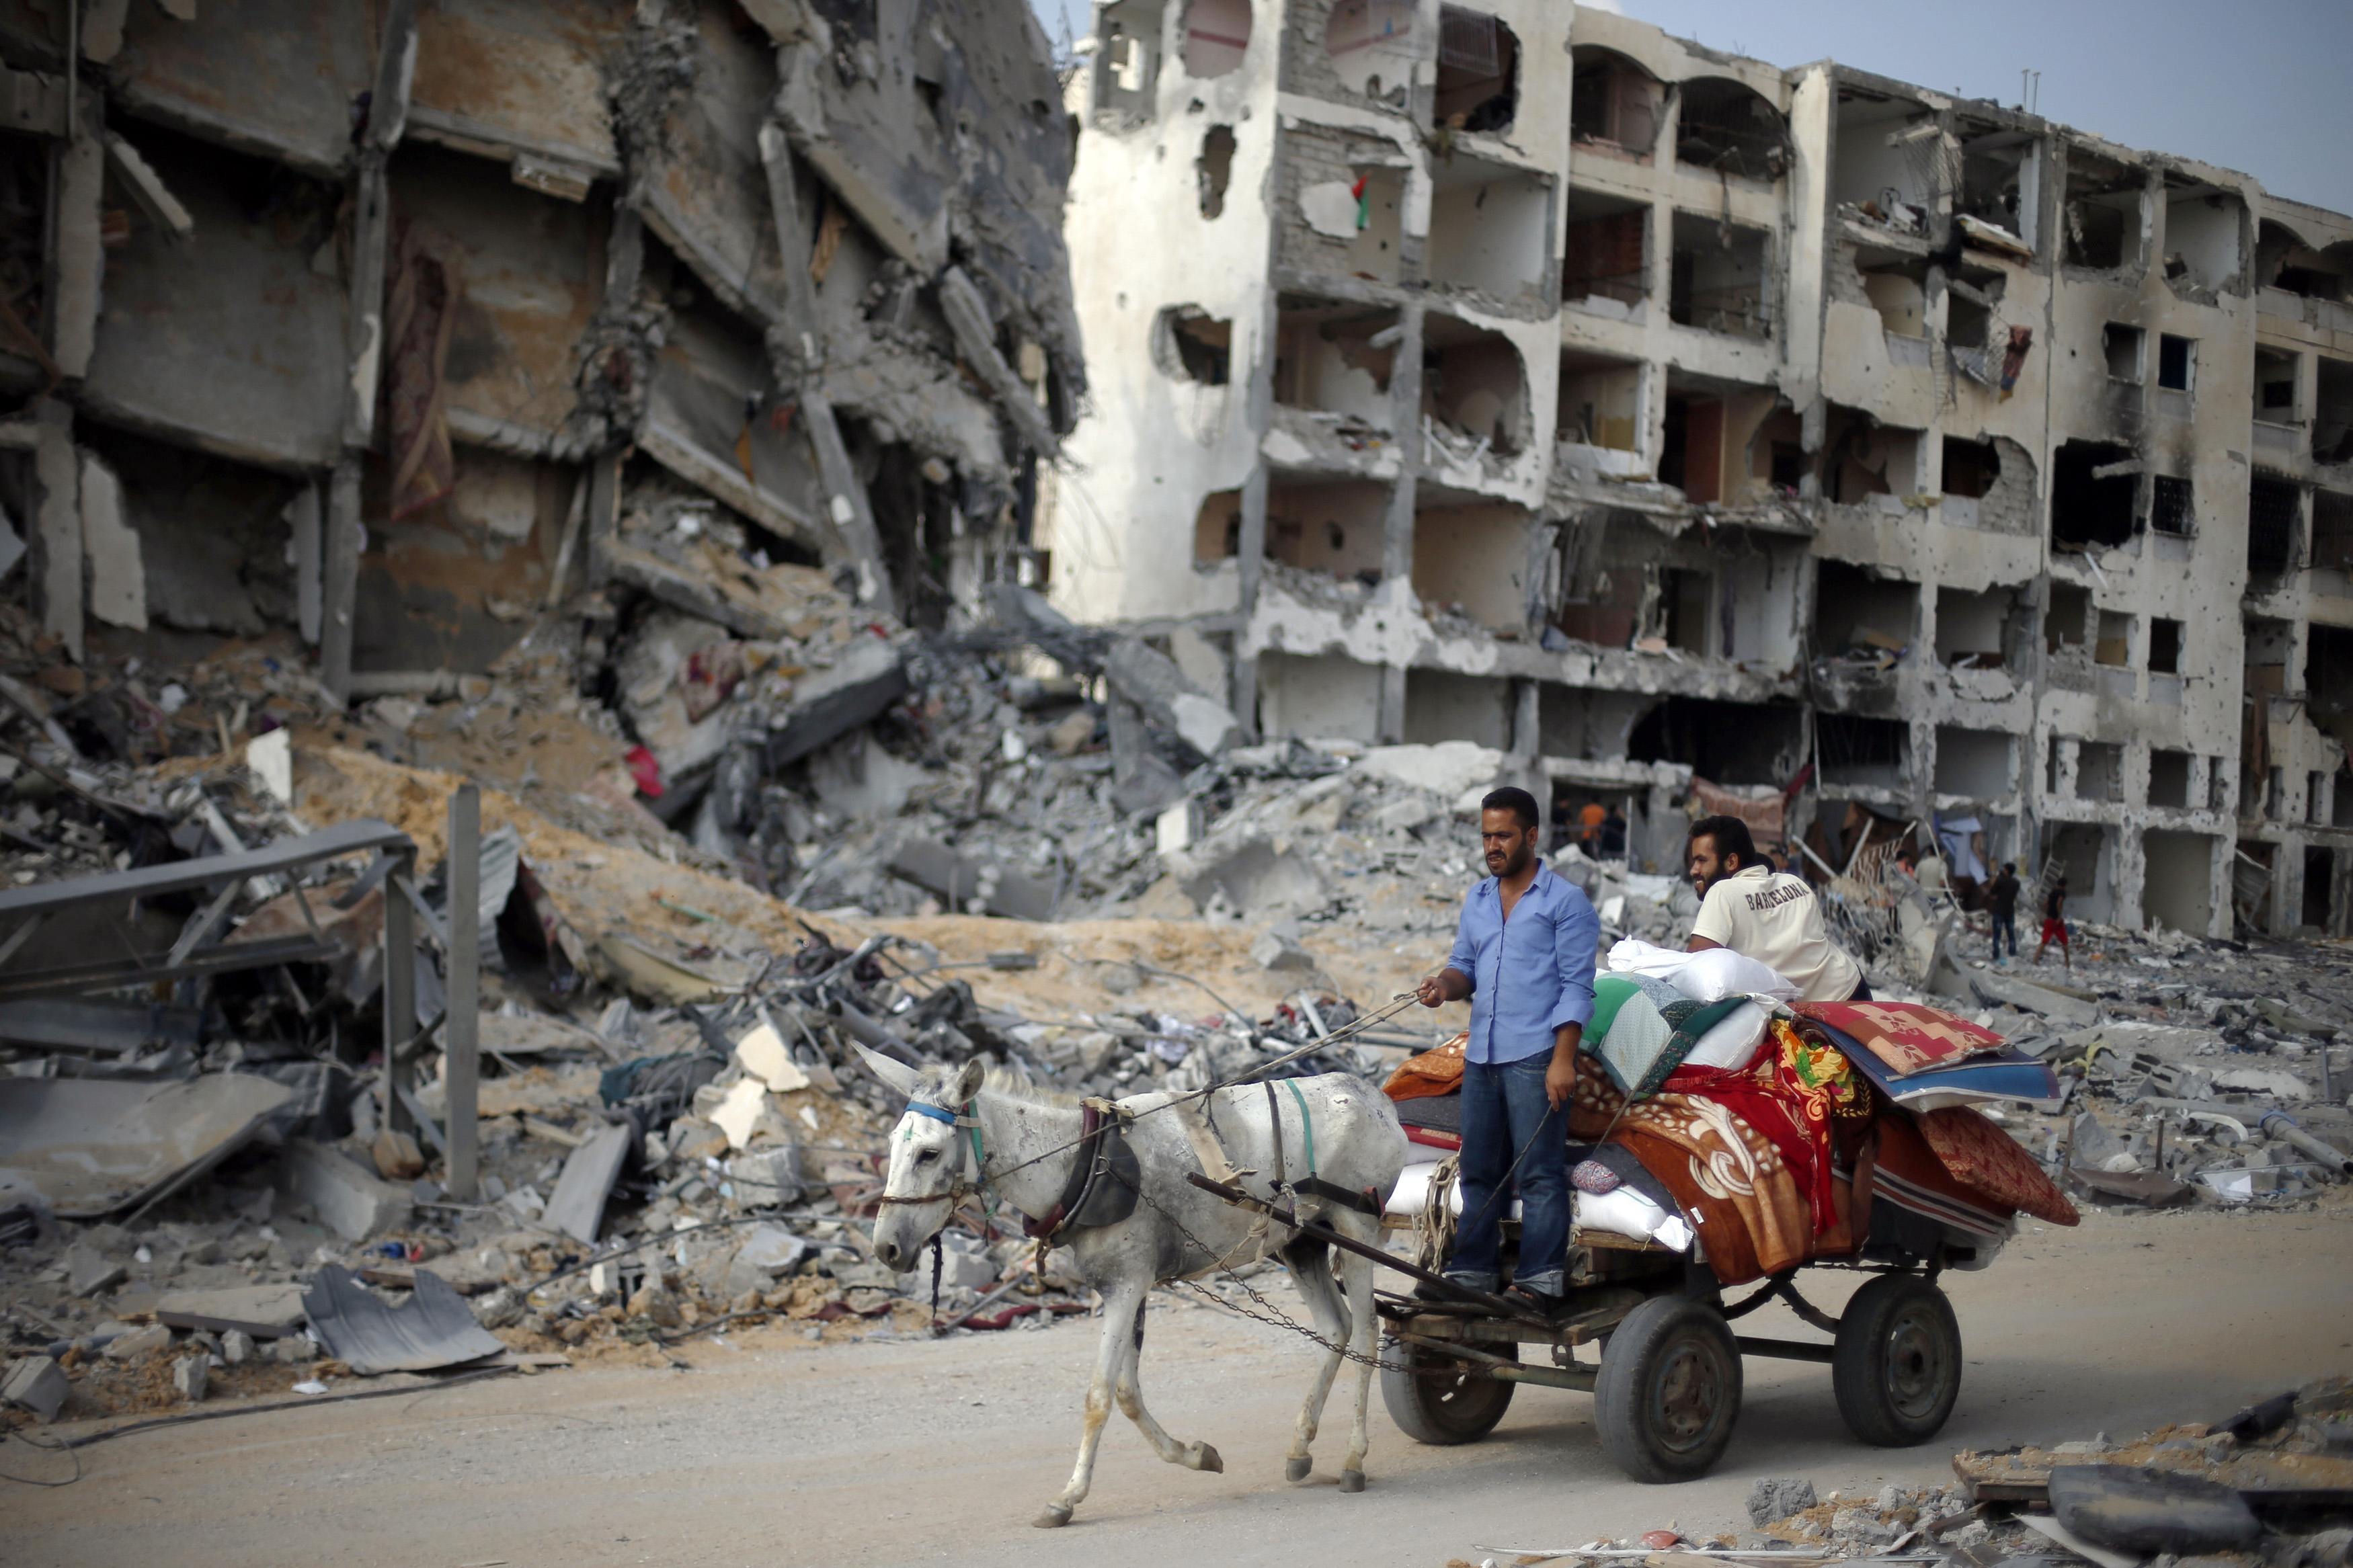 Palestinians are trapped in areas of the Gaza Strip hit by Israeli shelling and air strikes. Photo: Reuters